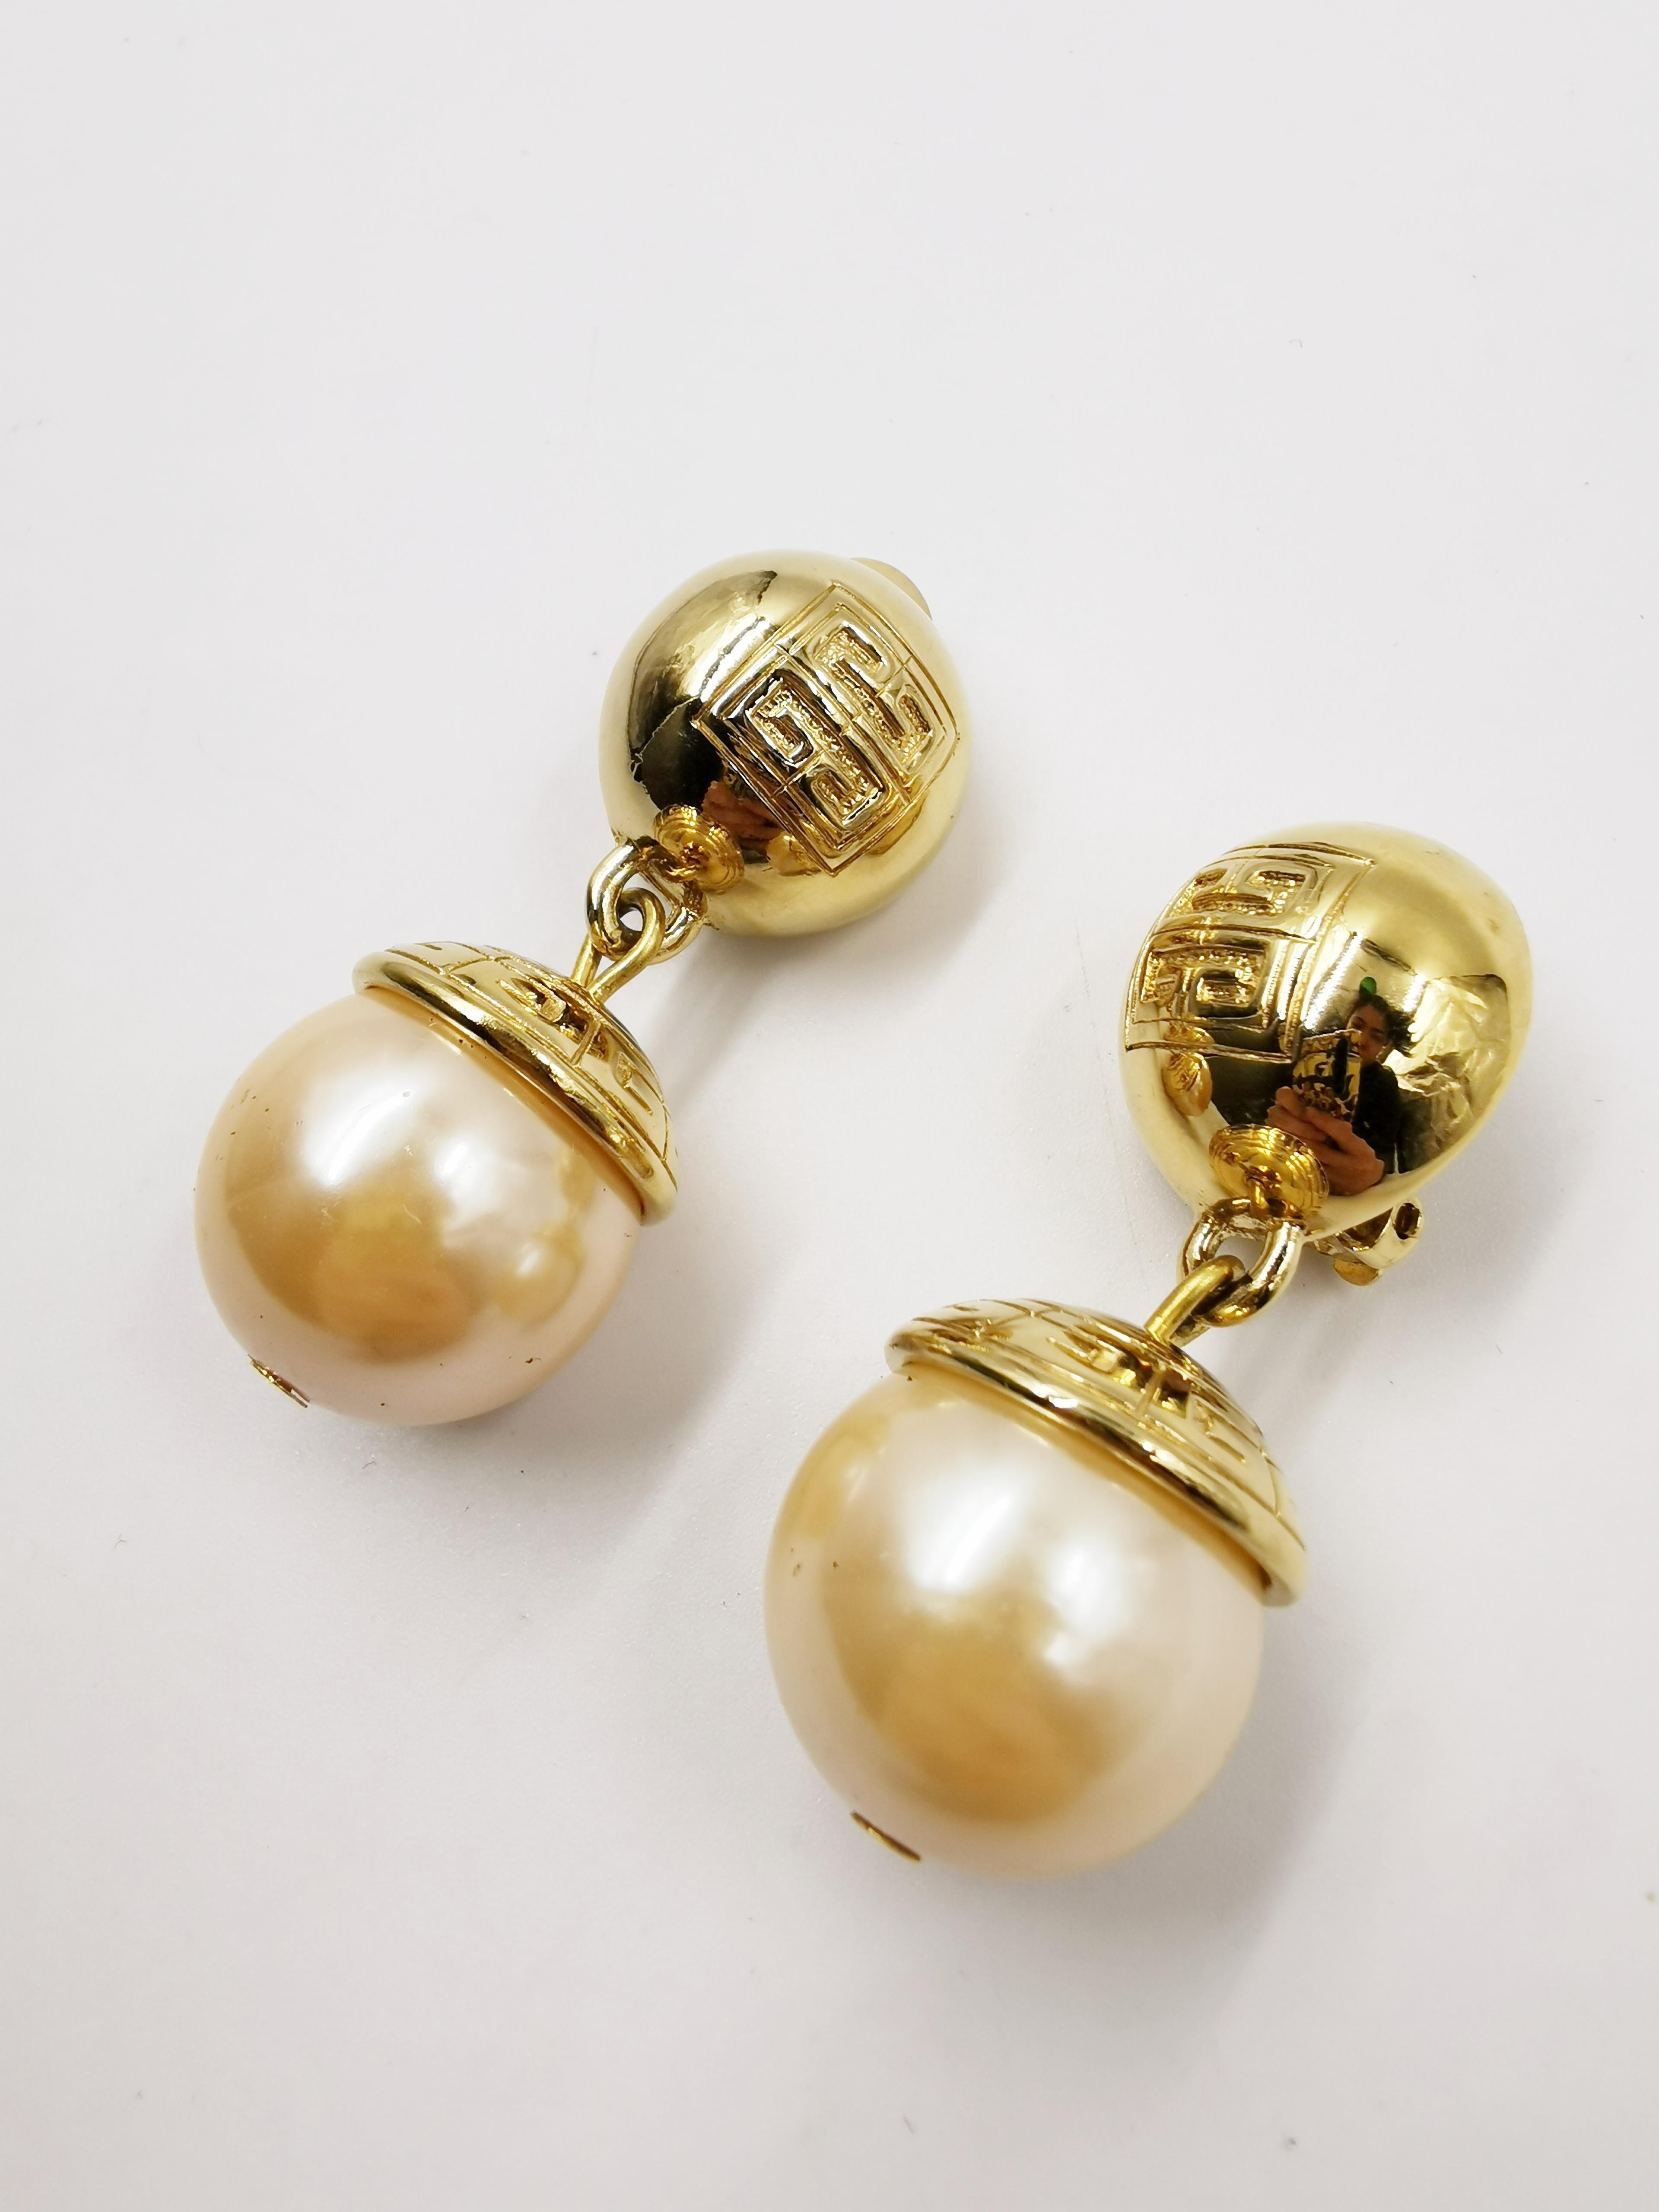 Vintage Givenchy large pearl gold drop earrings, a perfect match with our Karl Lagerfeld jumbo necklace.

Feature
Material: Gold-tone Metal and Pearls
Condition: Excellent
Colour: White and Gold
Dimension: 5.5cm
Period: 1990-
Place of Origin: France